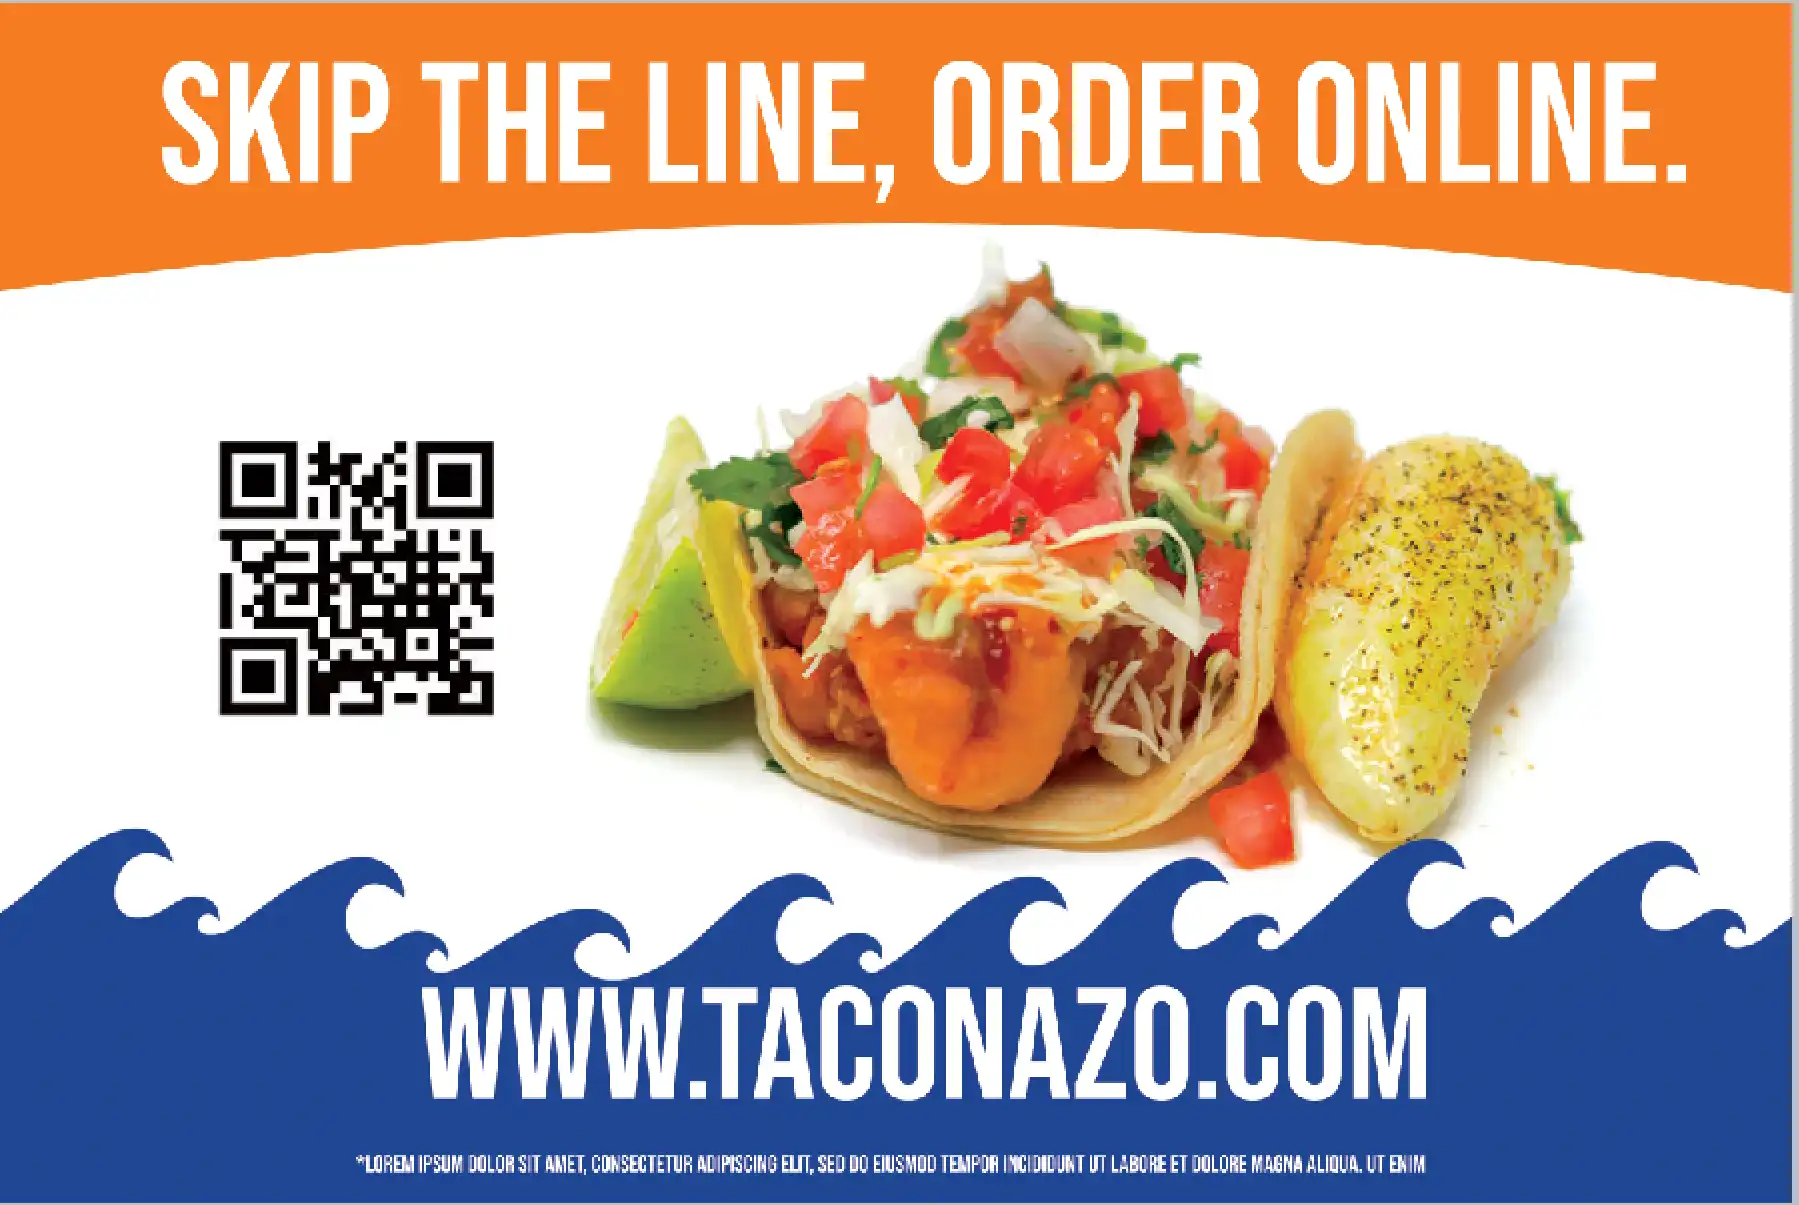 Online Ordering Promotional Flyer with a fish taco, chile, and lime.